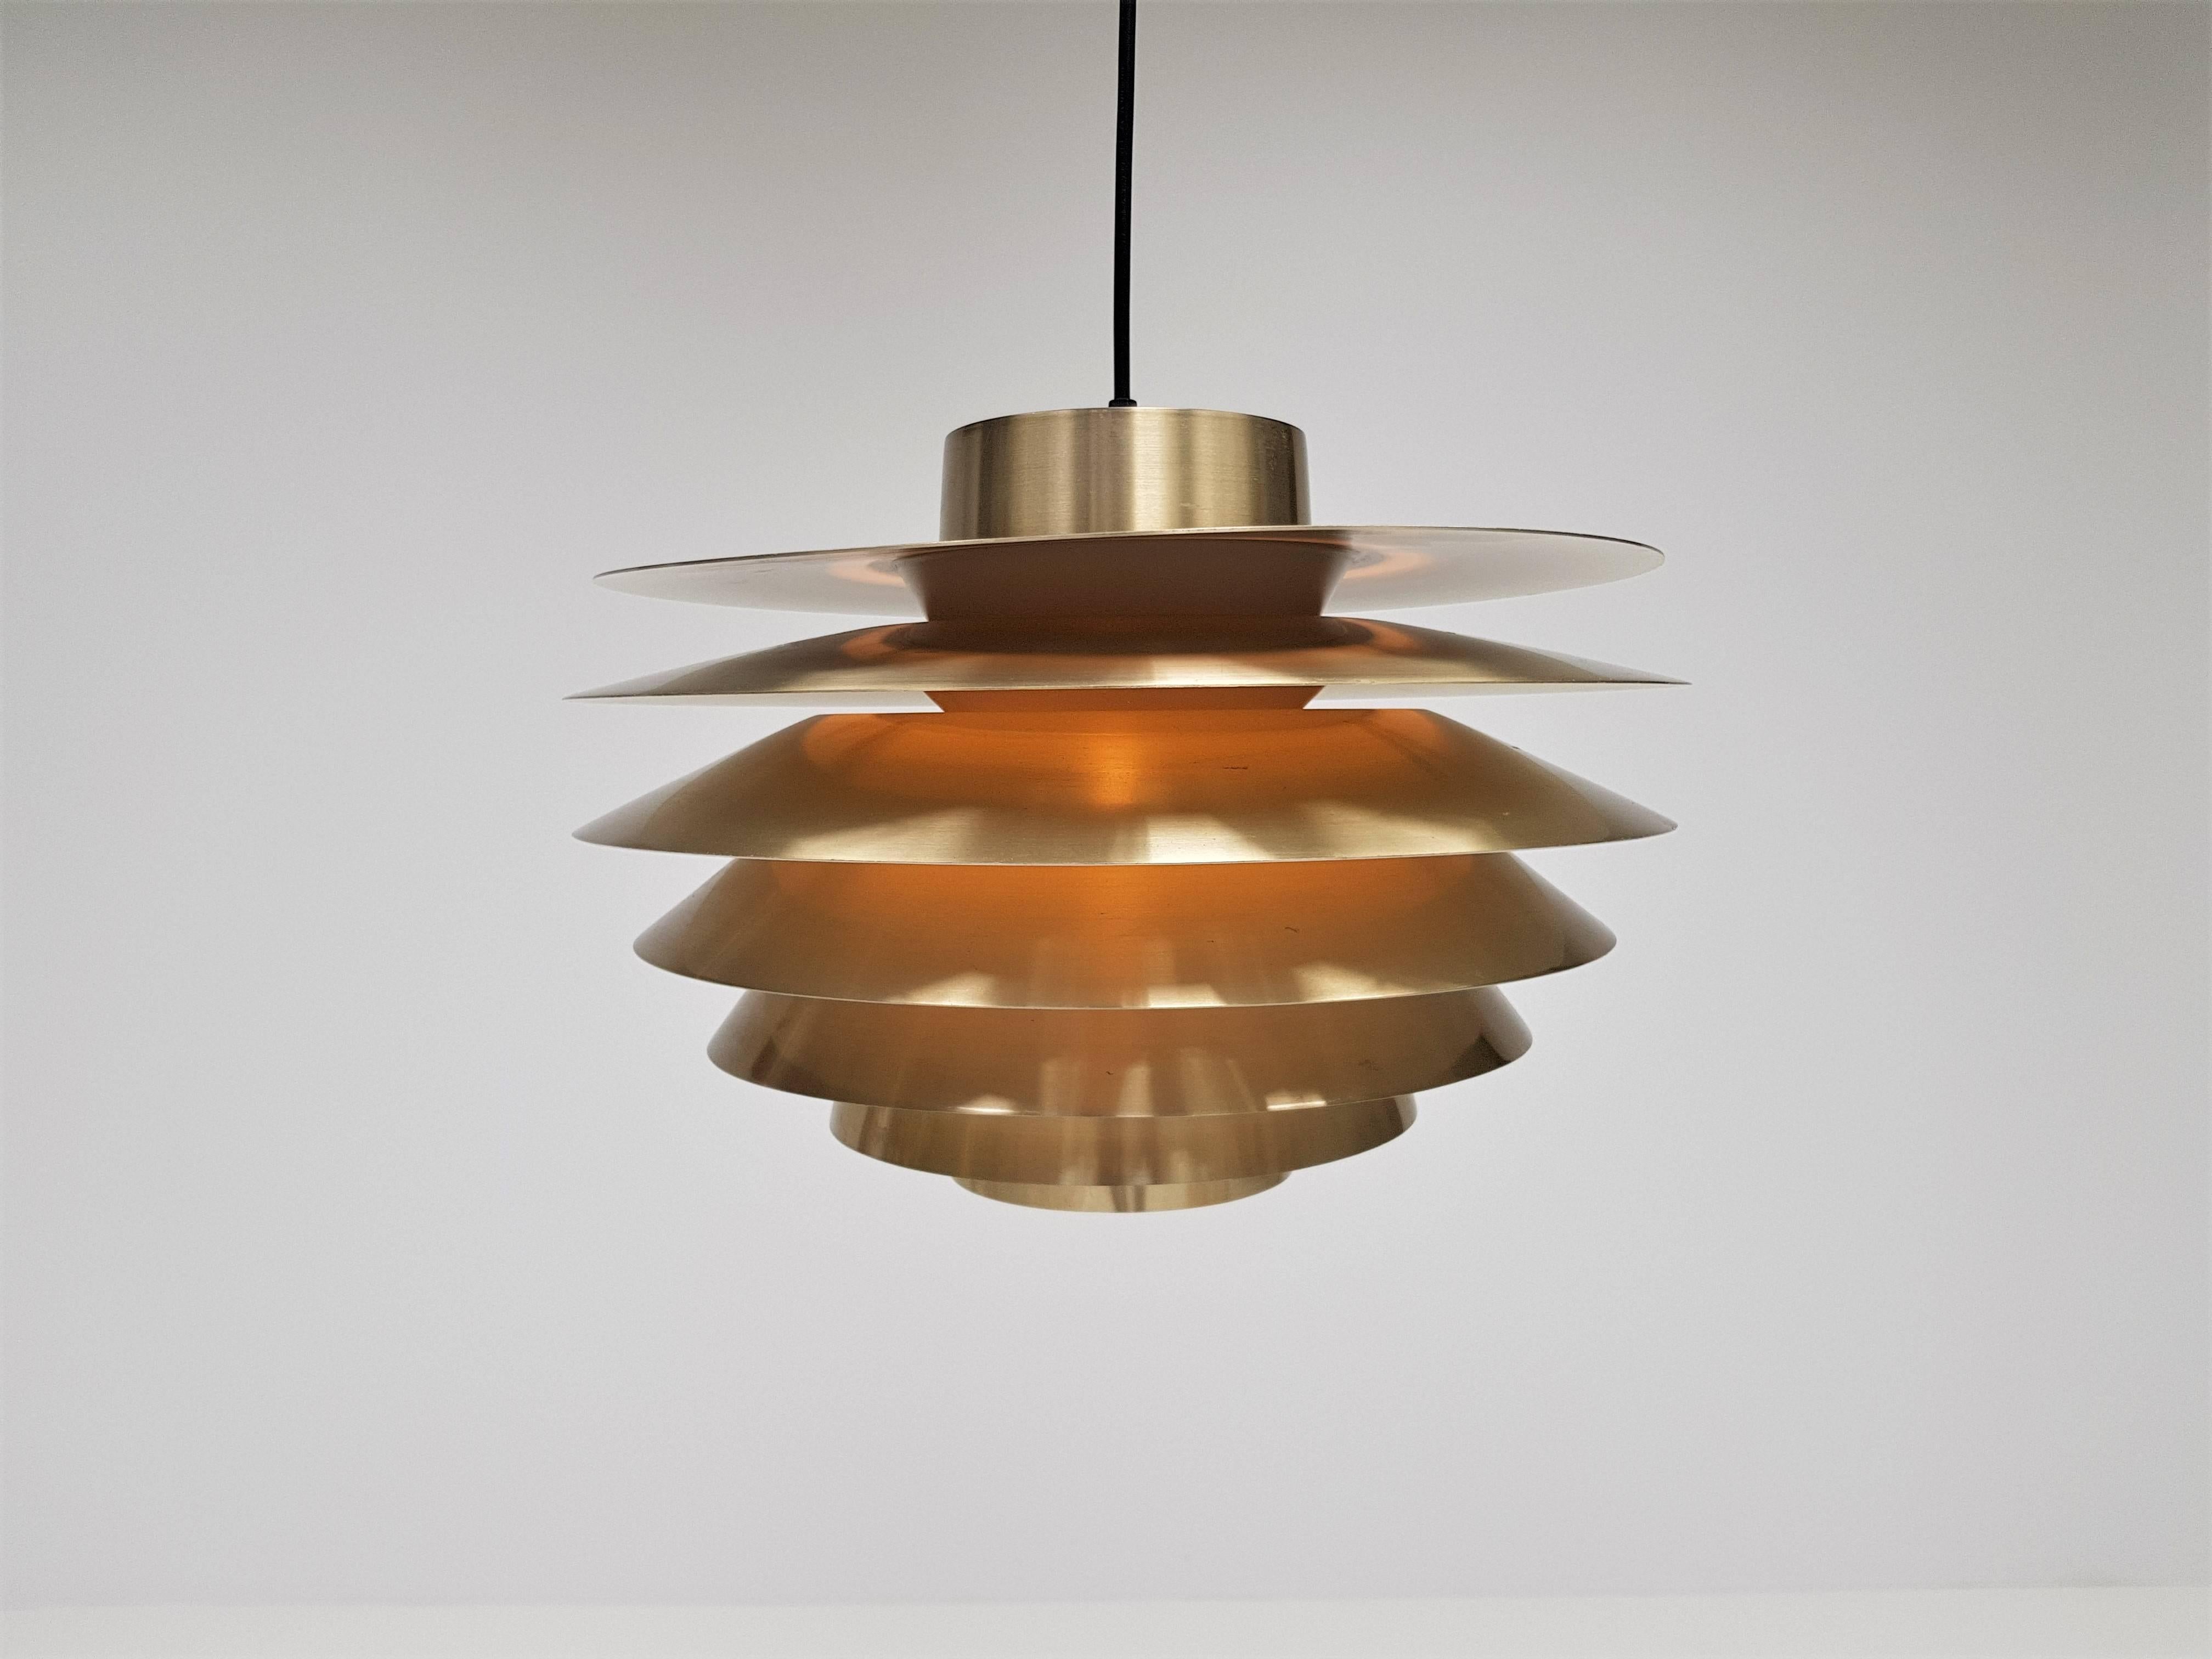 A vintage brassed Svend Middelboe Verona pendant light produced by Nordisk Solar, 1970s

Constructed from tiers of aluminium emitting a warm subtle glow when lit.

Fully working, rewired, safety tested and passed, supplied with a new minimal